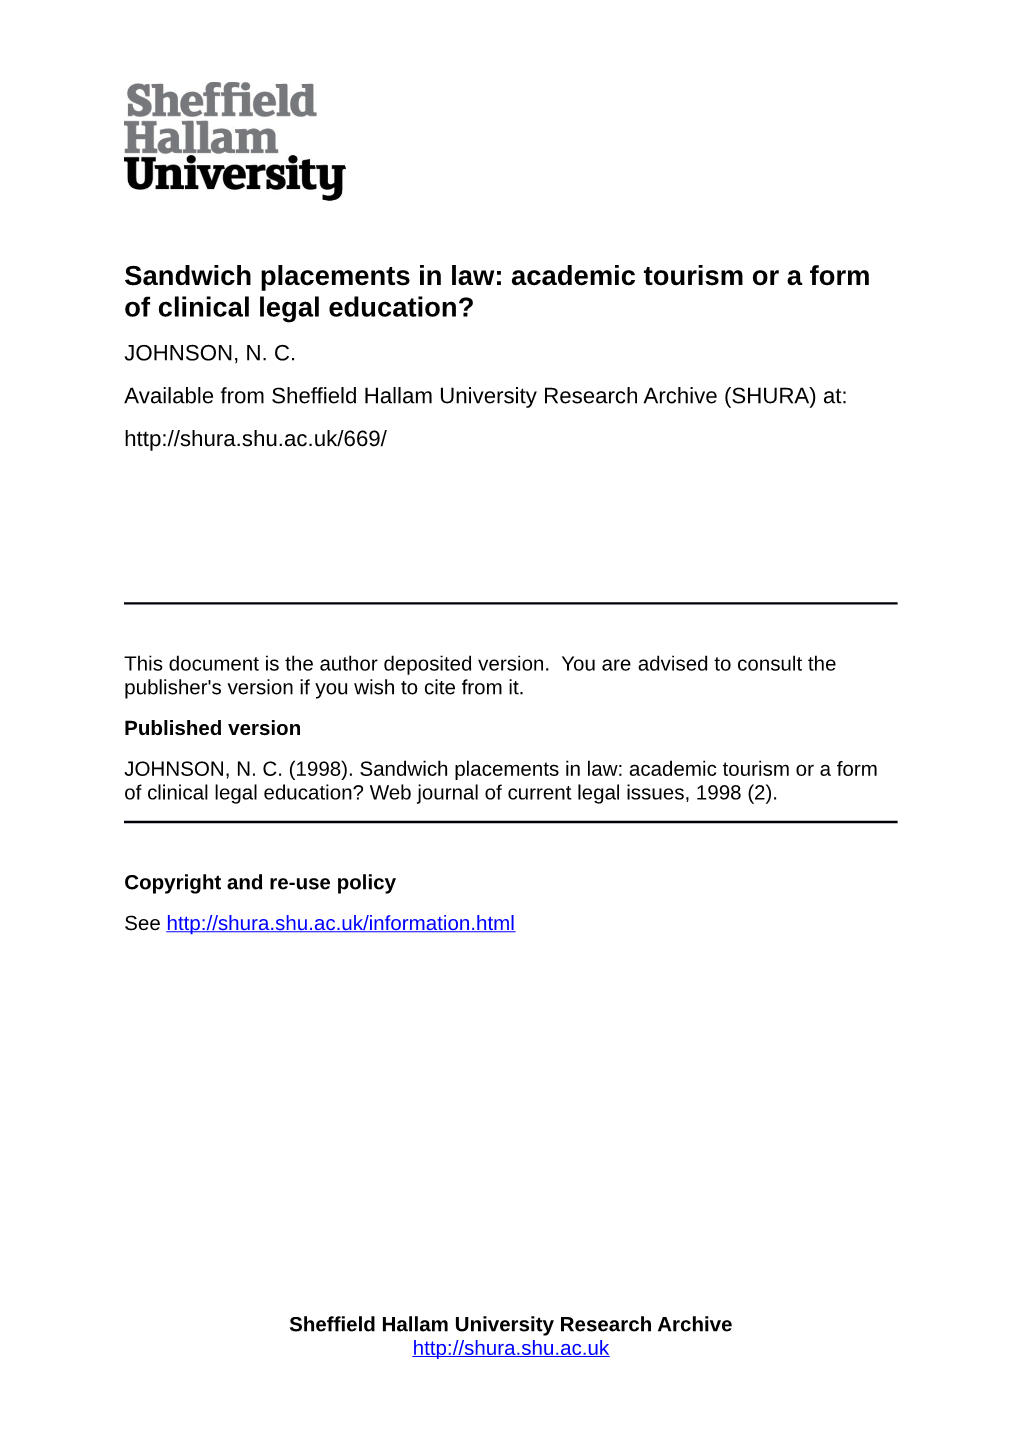 Sandwich Placements in Law: Academic Tourism Or a Form of Clinical Legal Education? JOHNSON, N